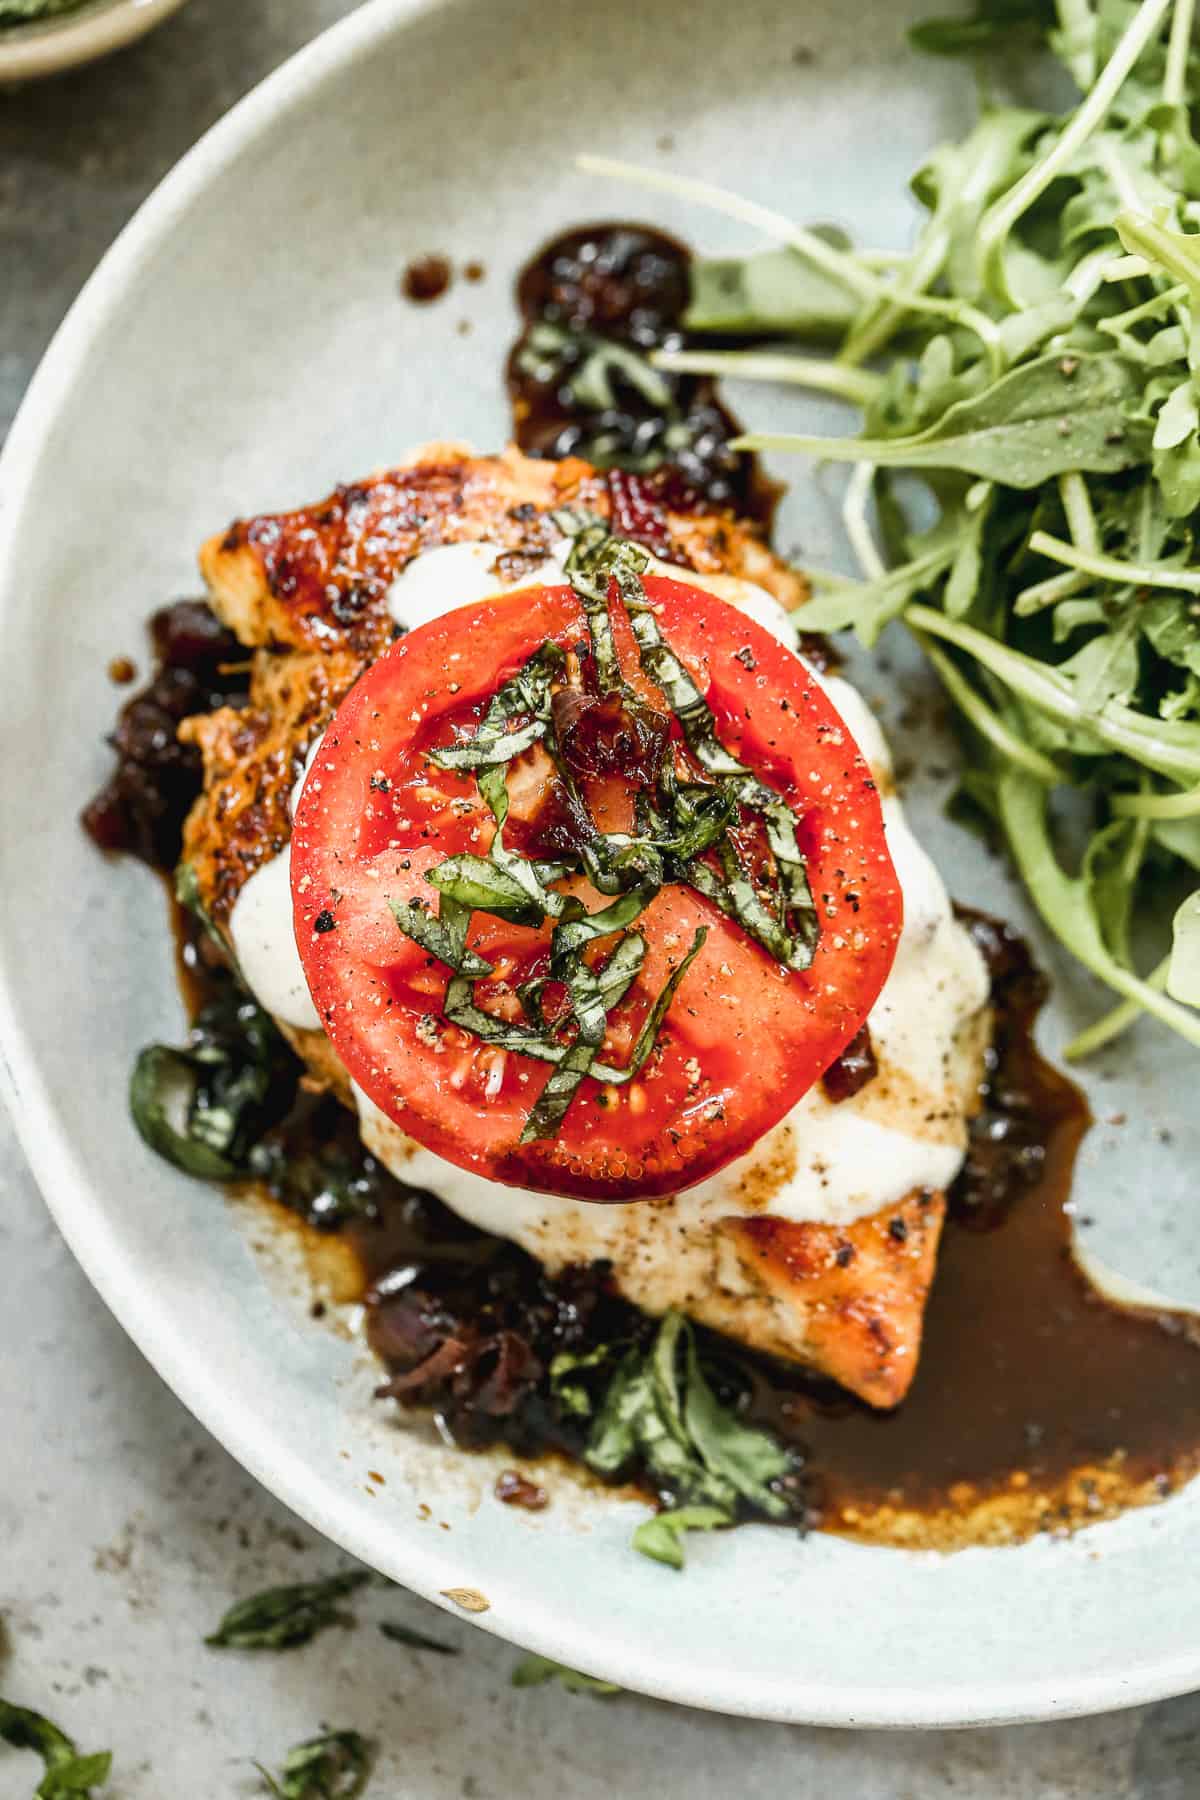 A baked chicken caprese recipe with melted mozzarella cheese and topped with a slice of fresh tomato and chopped basil.